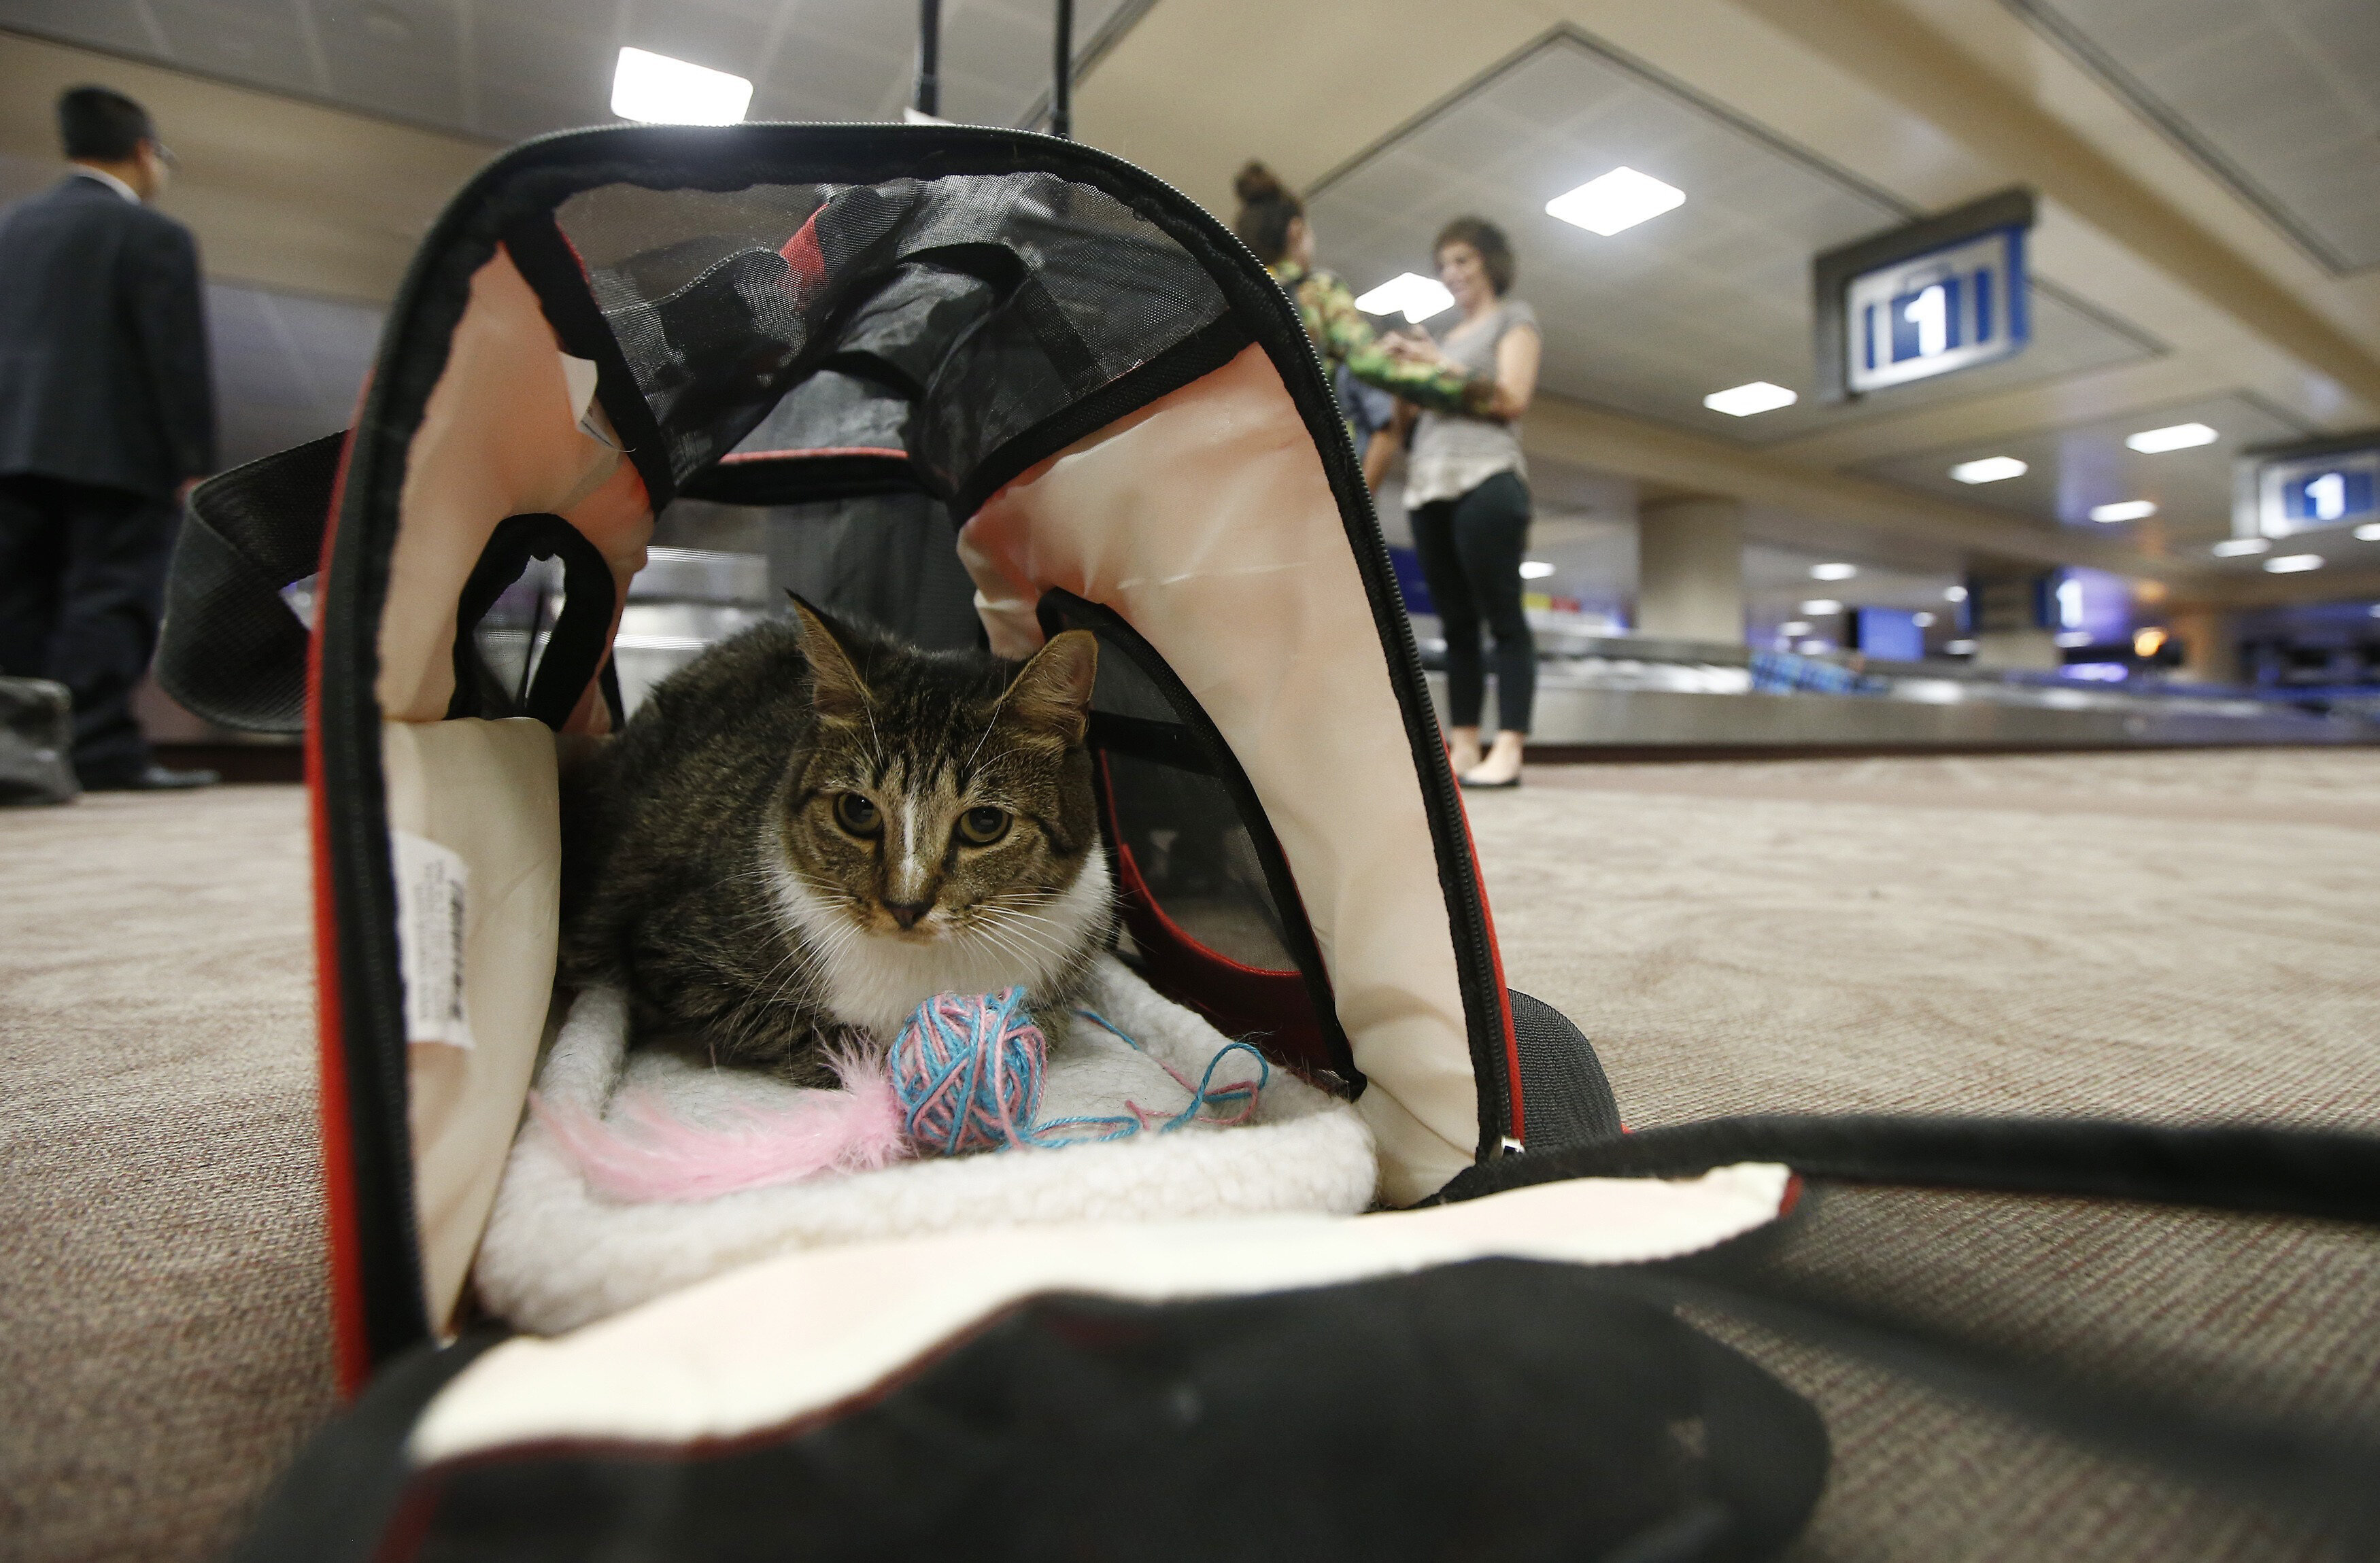 Emotional Support Animals Could Soon Be Banned From Planes